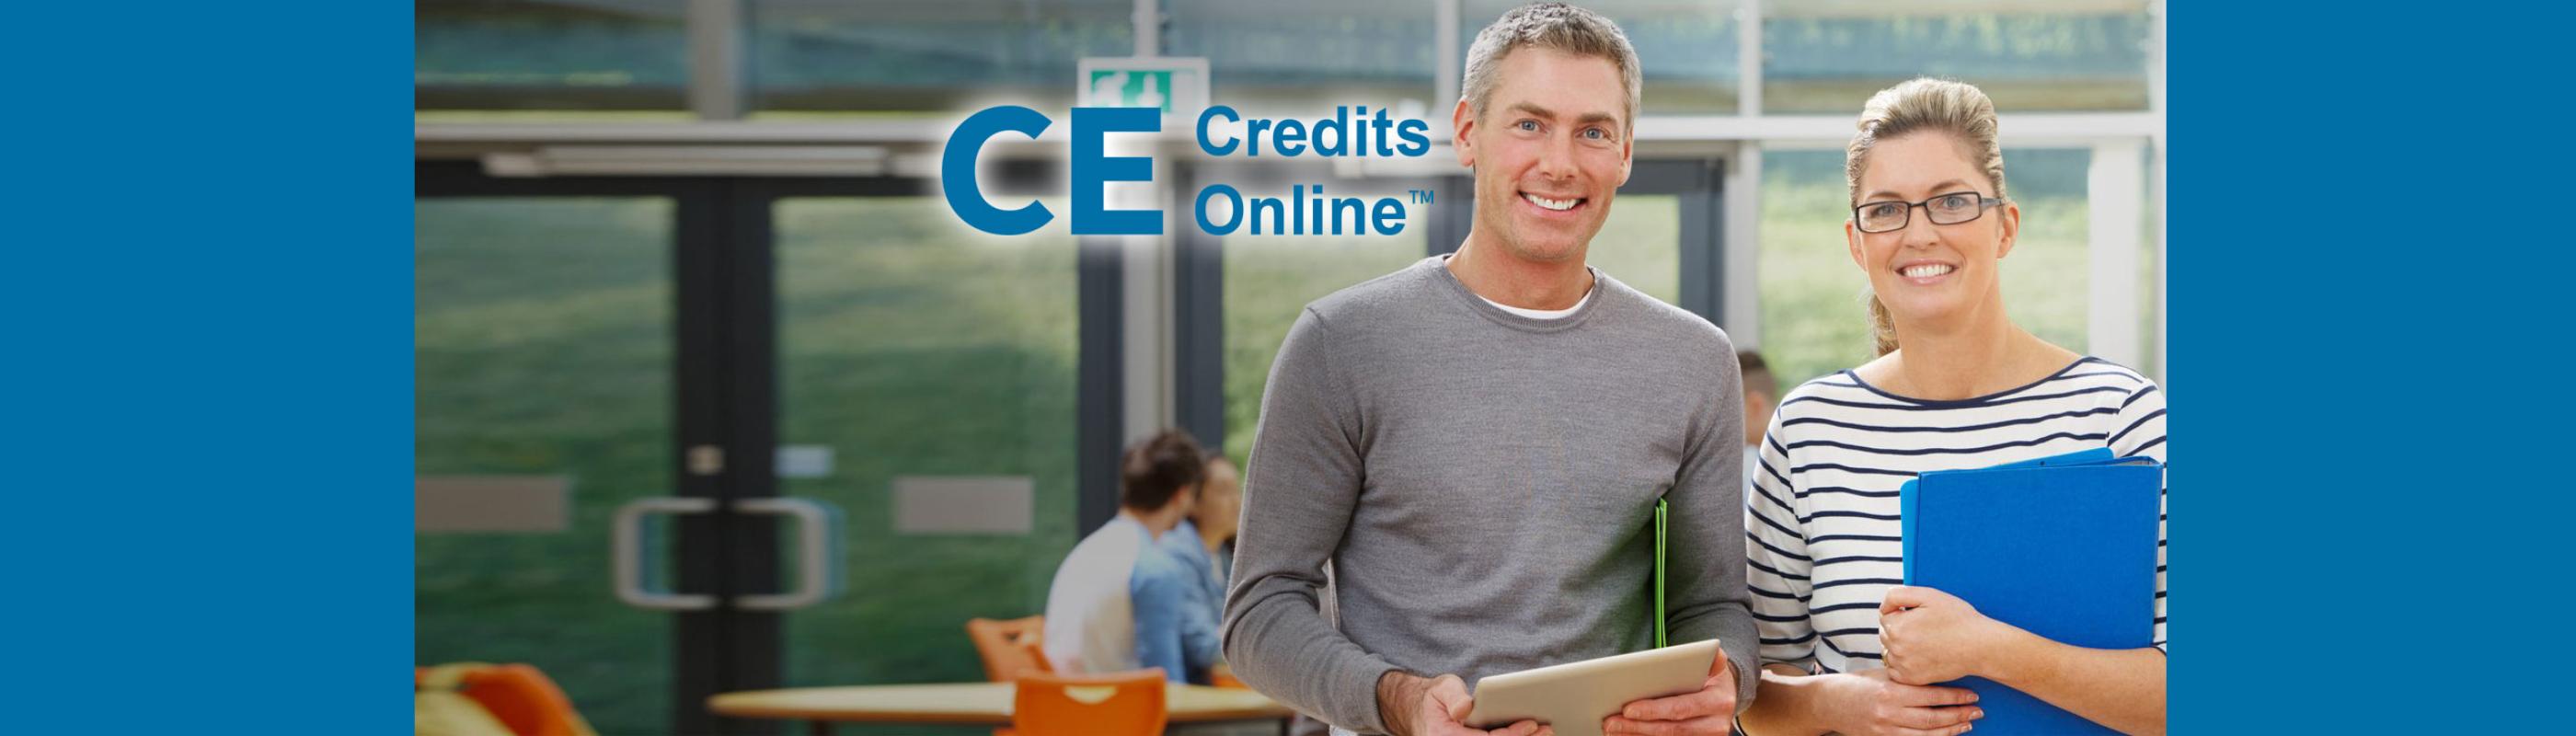 CE Credits Online [Man and woman in classroom]